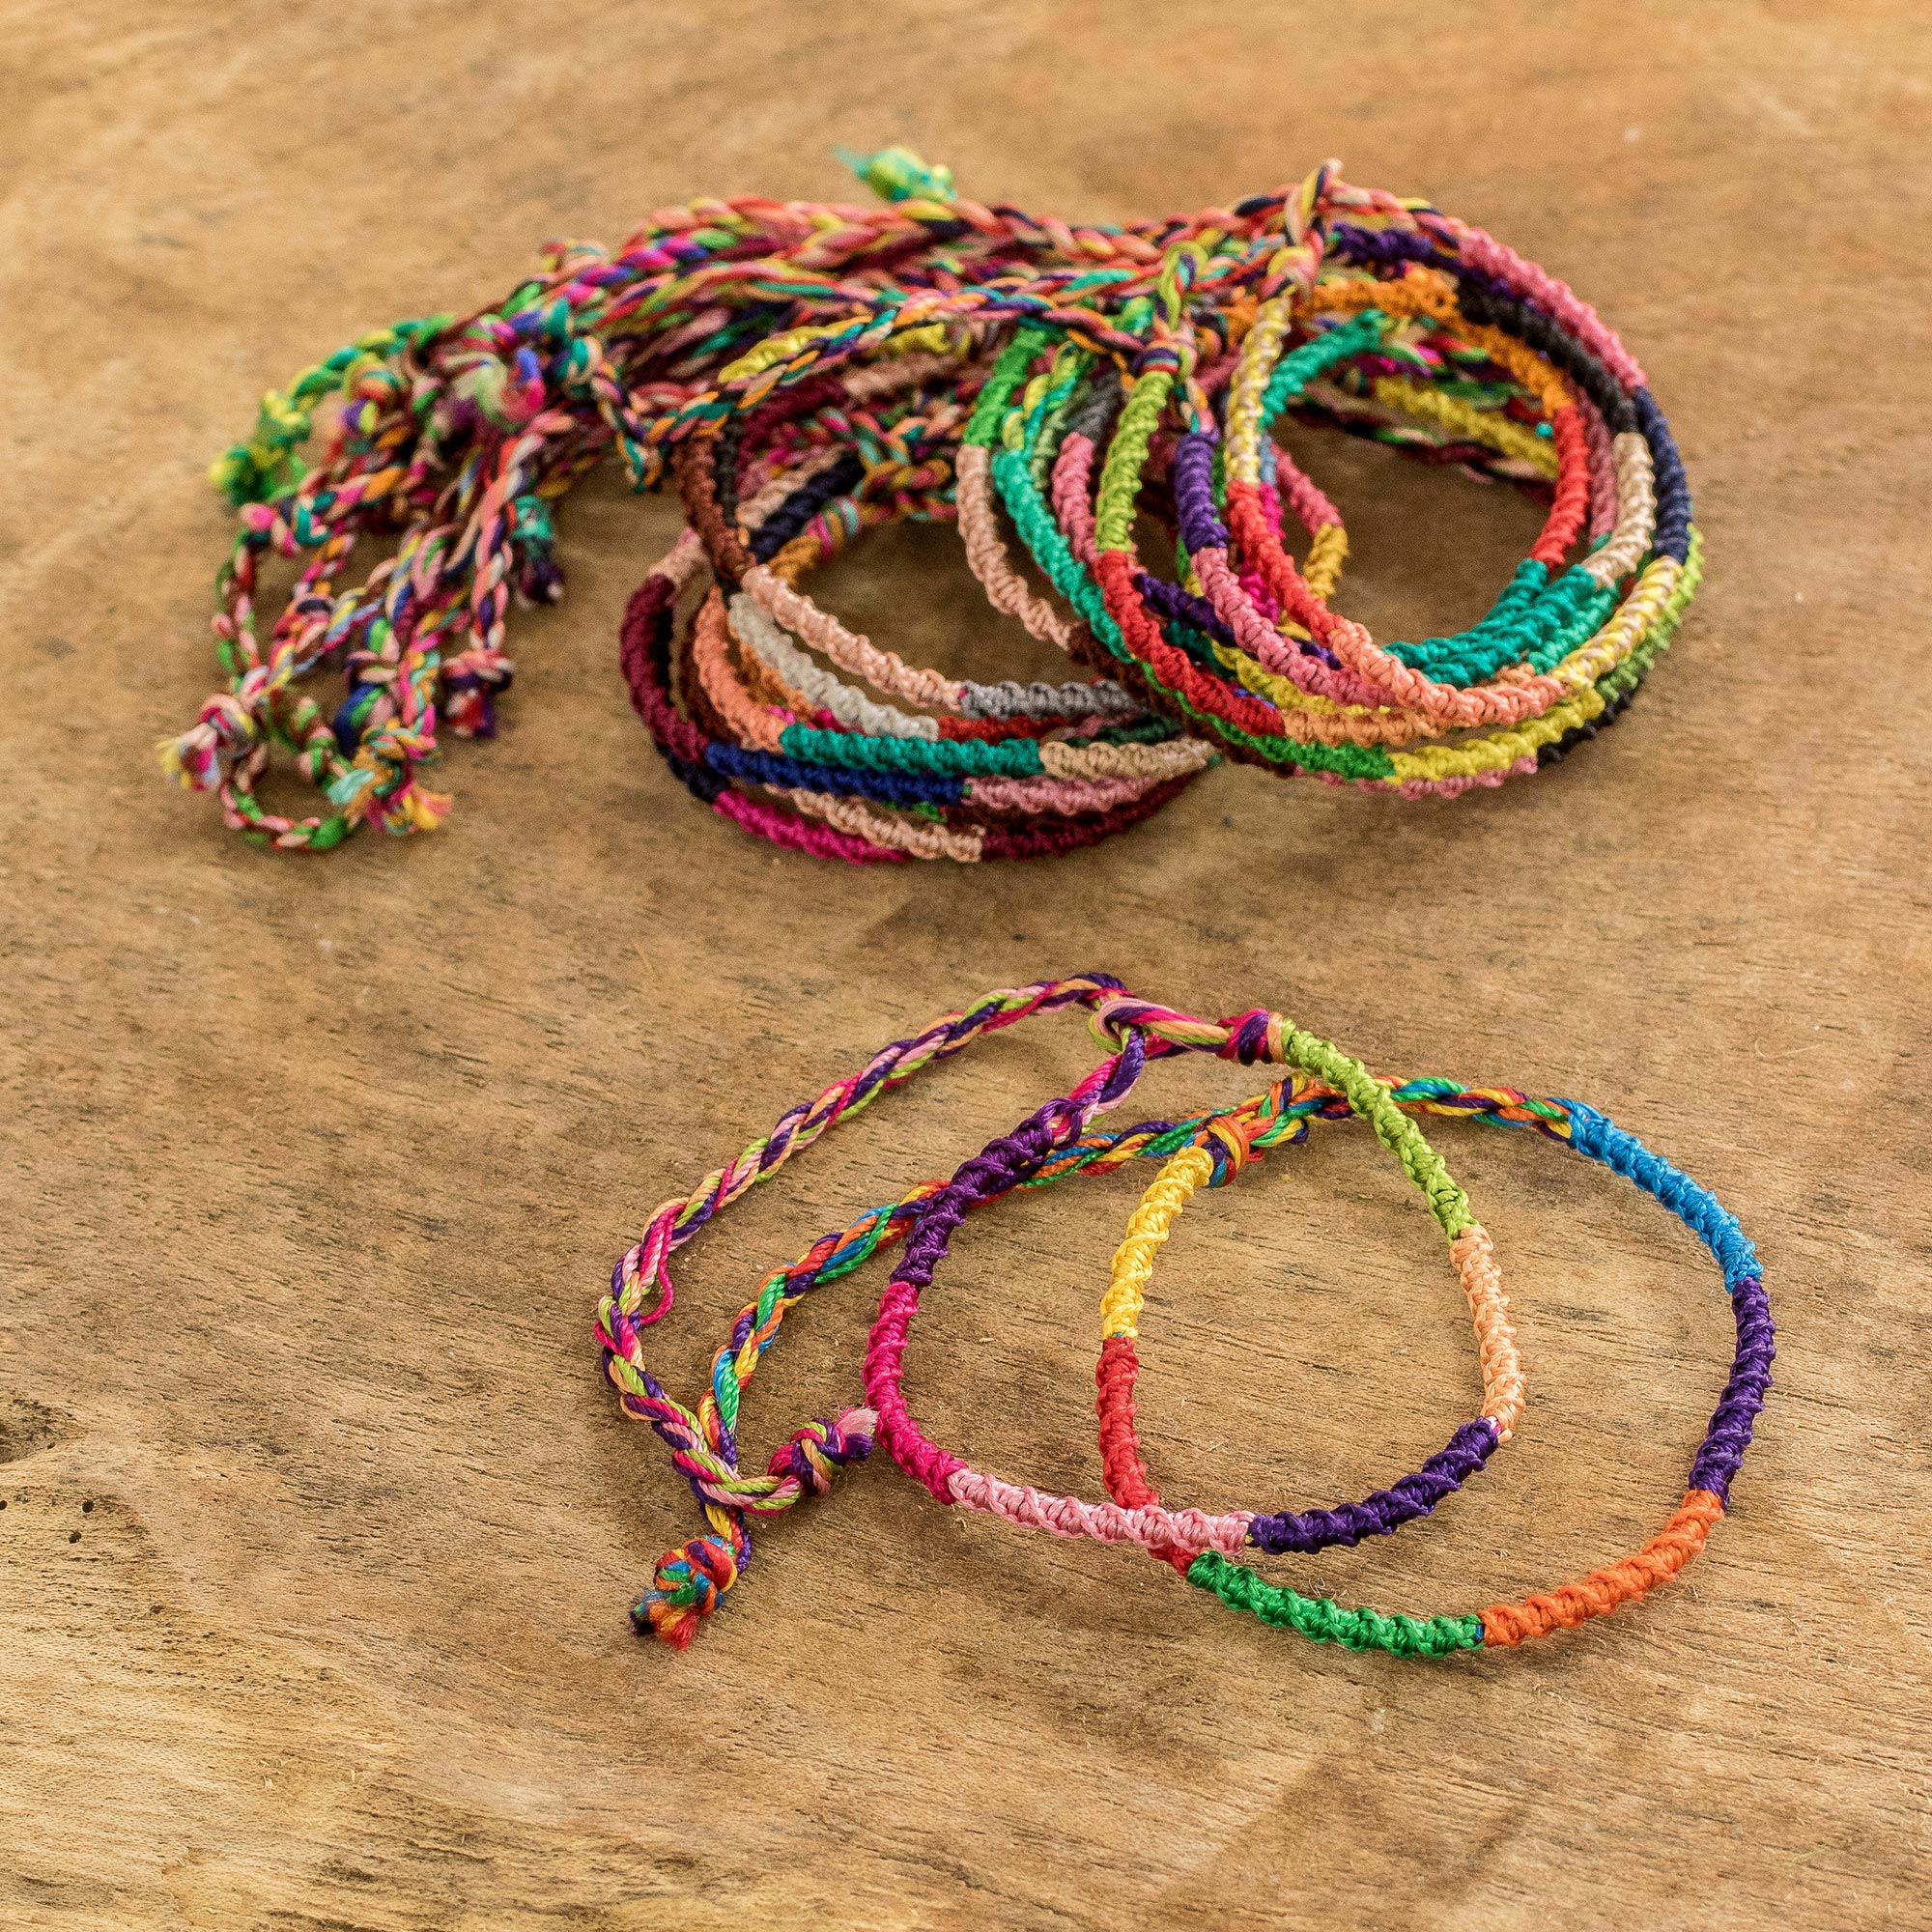 Friendship Bracelets All Grown Up: Hemp, Floss, and Other Boho Chic Designs  to Make (Design Originals) 30 Stylish Designs, Easy Techniques, and  Step-by-Step Instructions for Intricate Knotwork: McNeill, Suzanne:  9781574218664: Amazon.com: Books